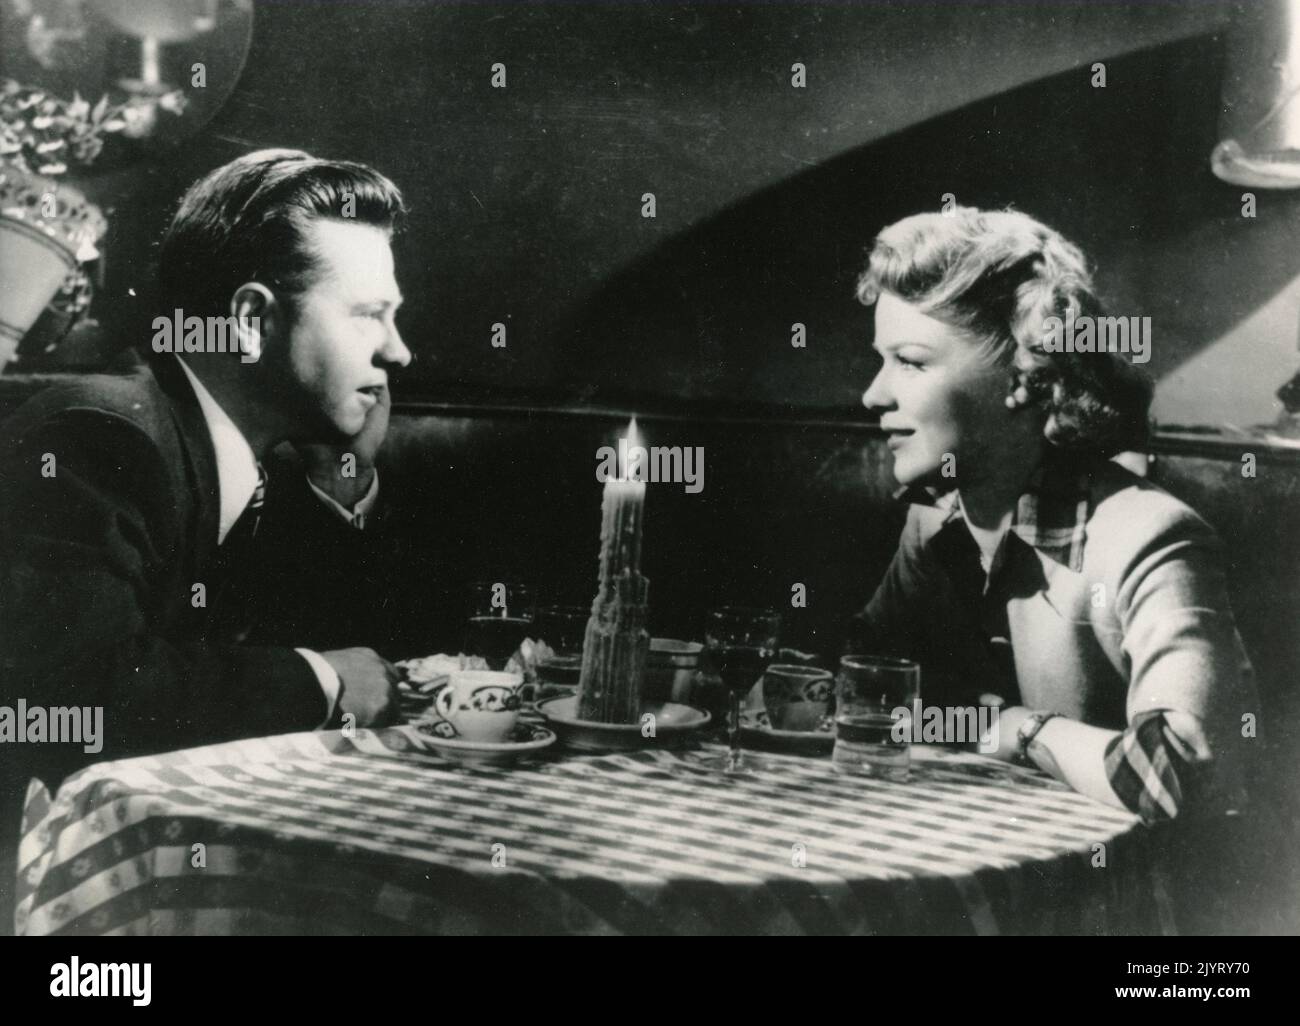 American actor Mickey Rooney and actress Sally Forrest in the movie The Strip, USA 1951 Stock Photo